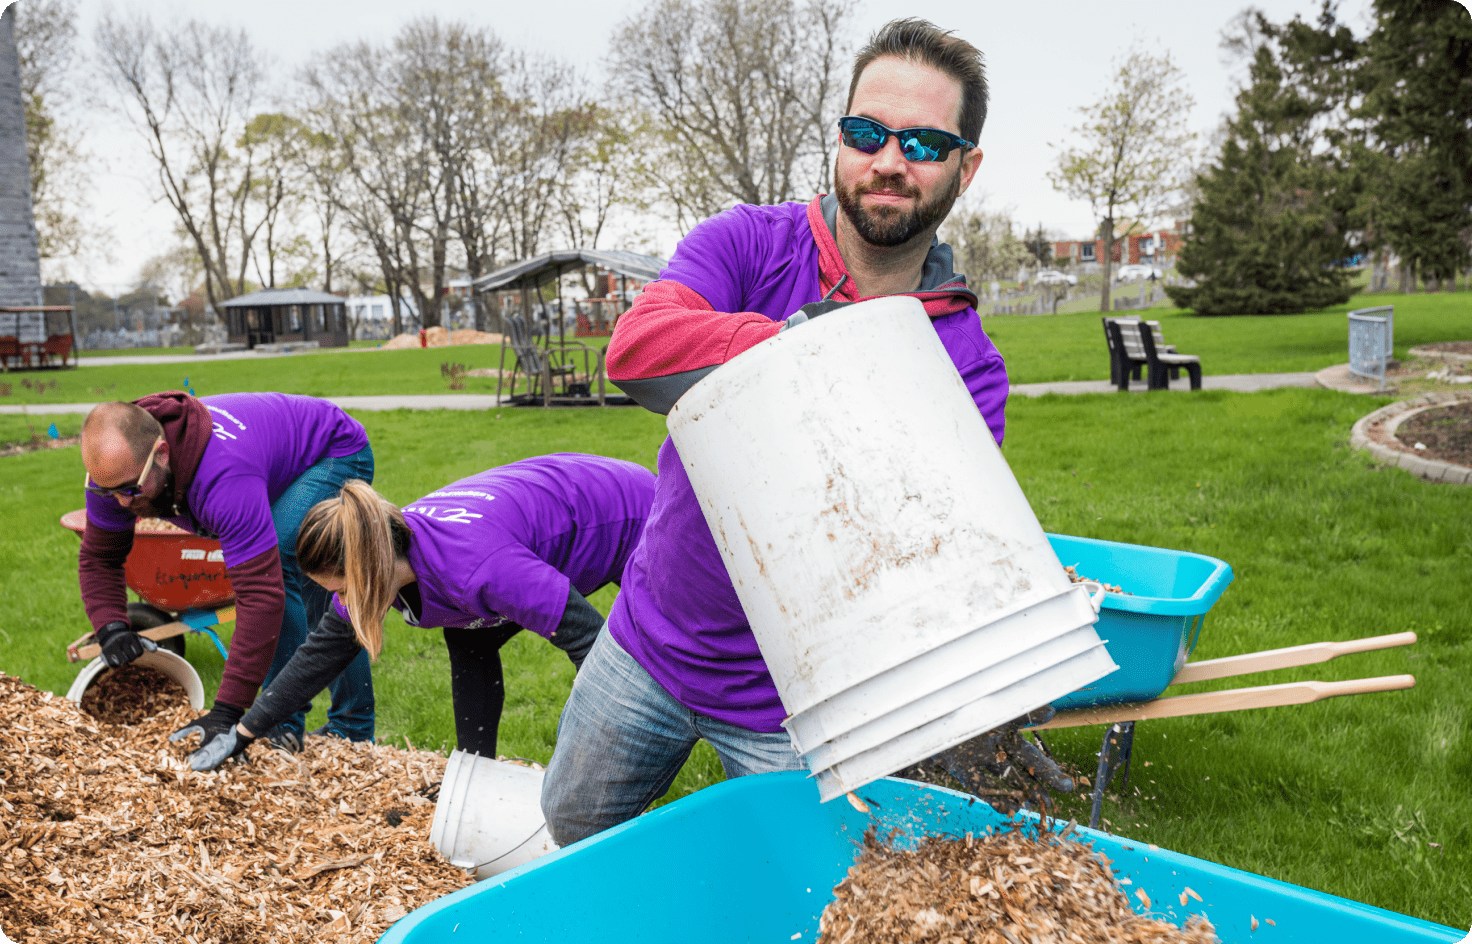 A TELUS team member emptying a bucket of woodchips into a wheelbarrow at the park.